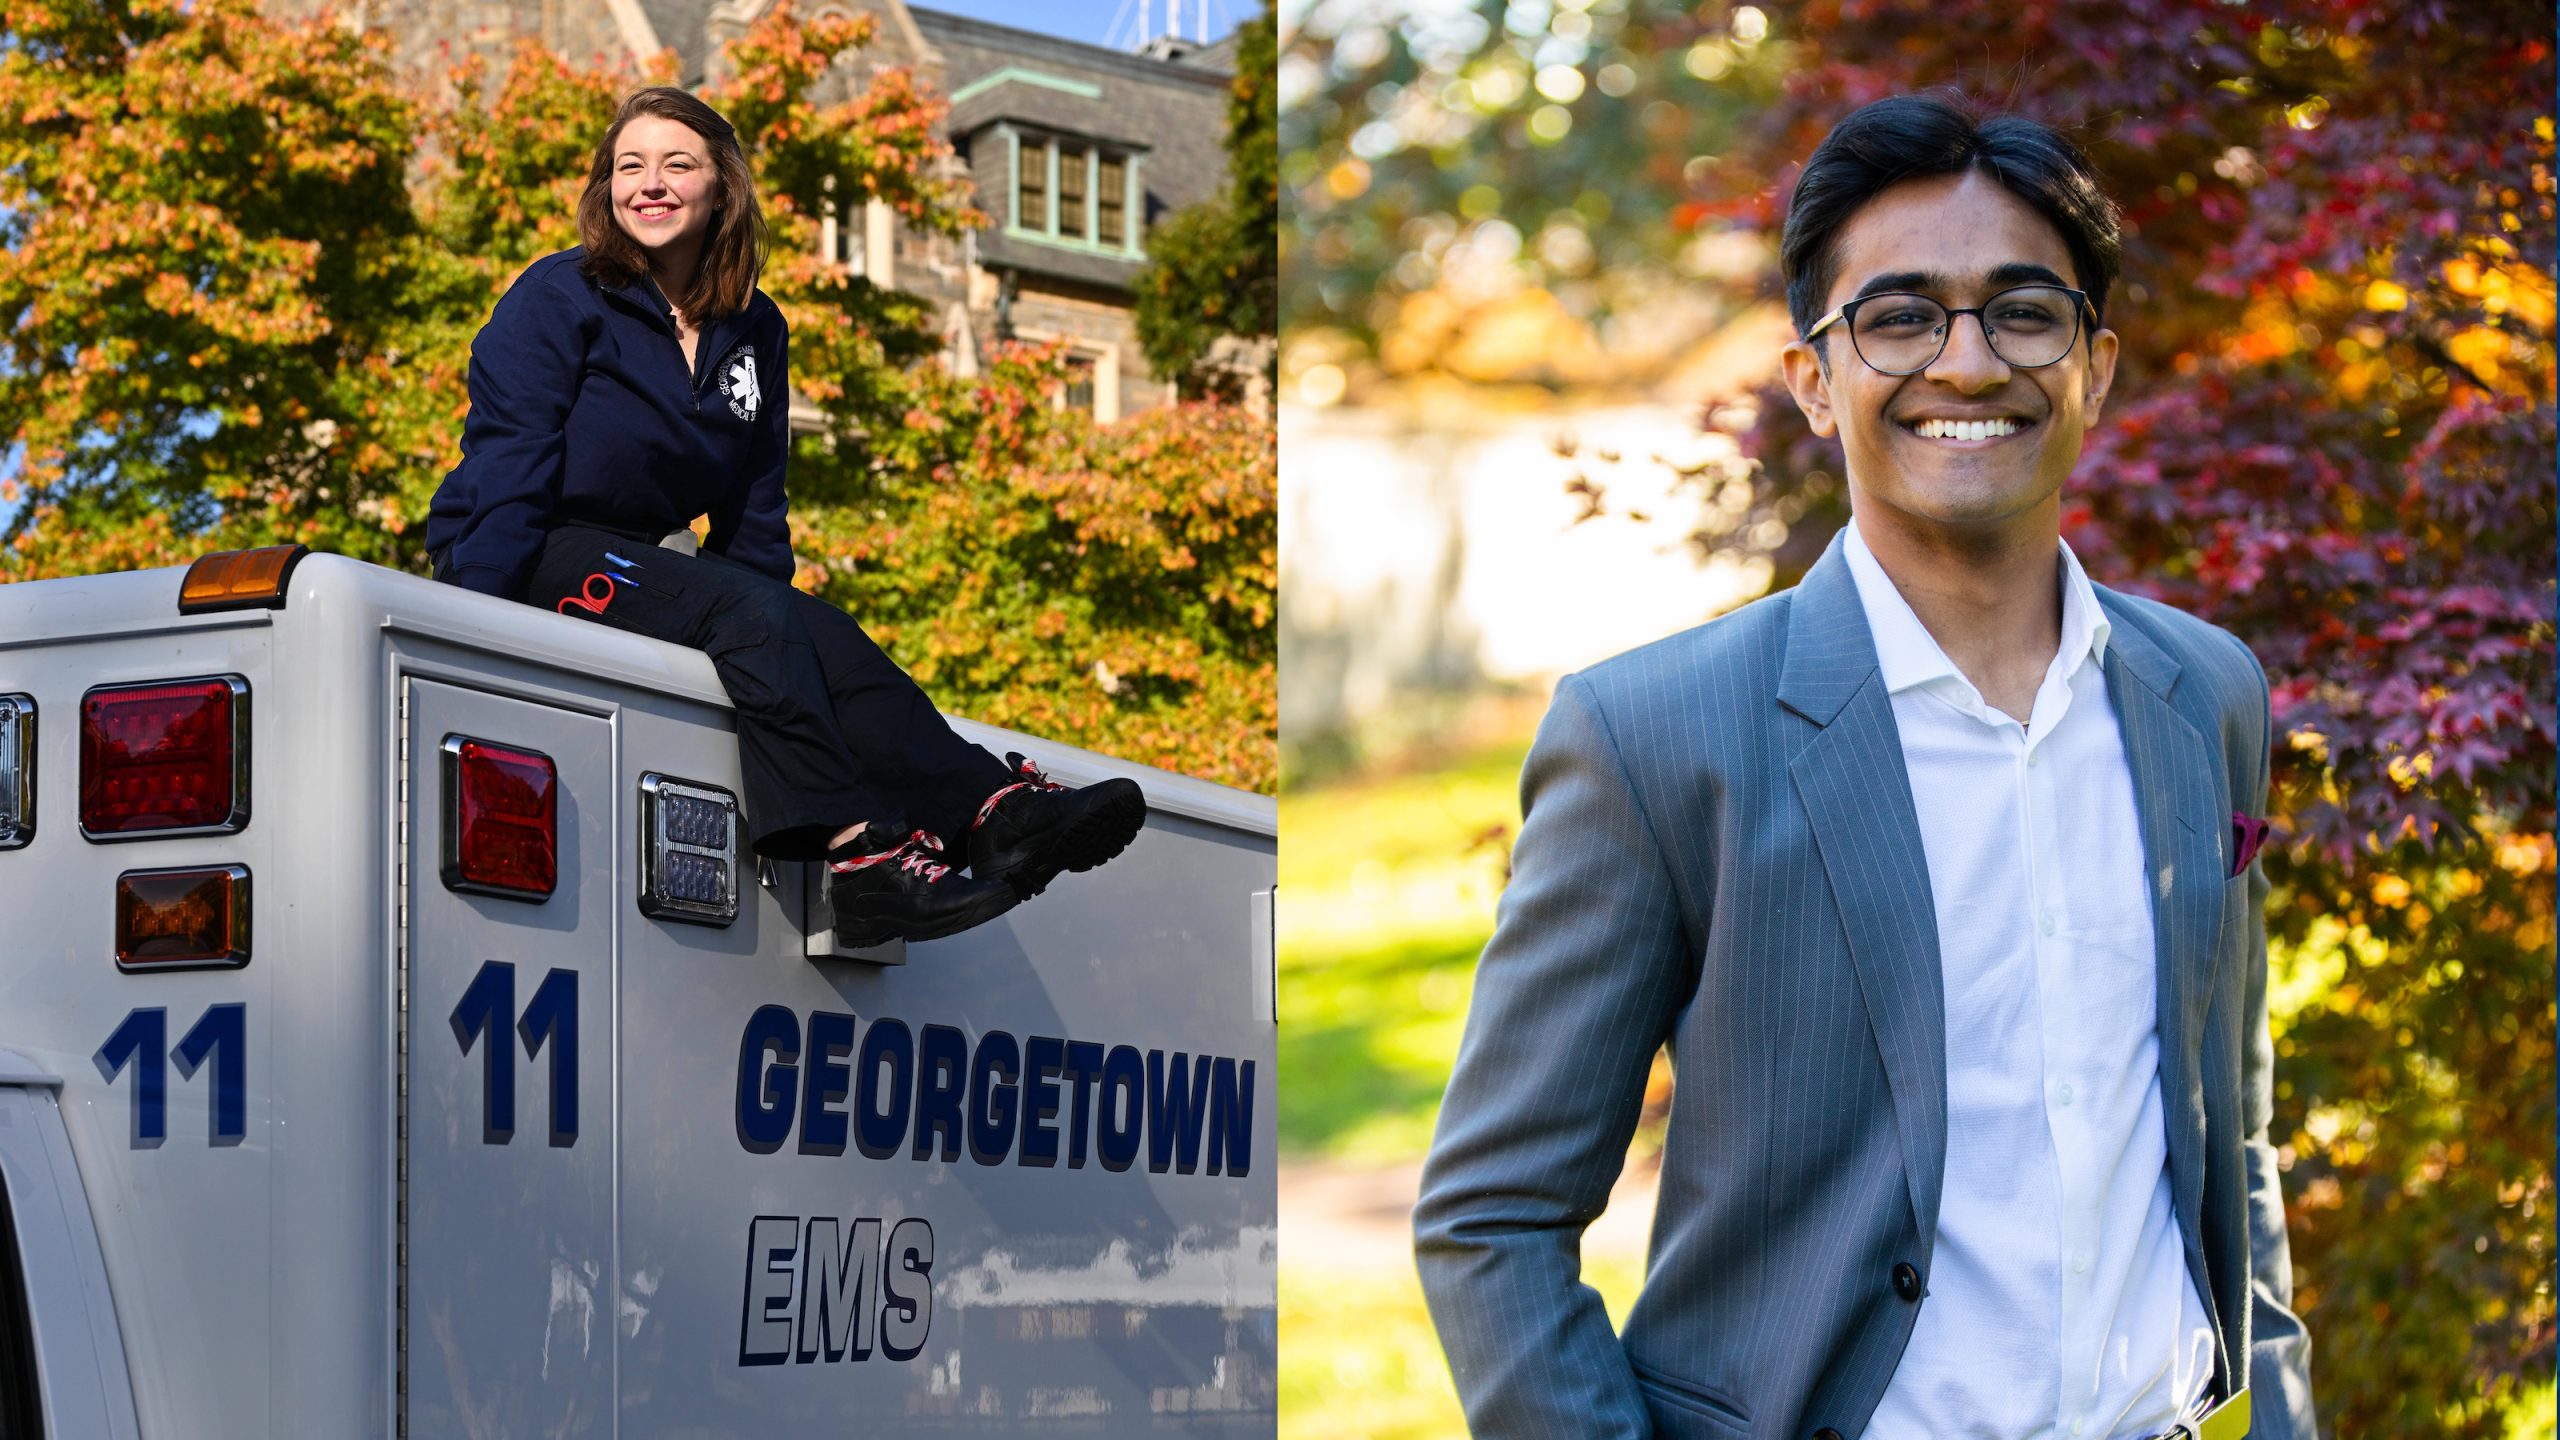 Isabella Turilli (left) sits on top of an ambulance and Atharv Gupta puts his hands in his pockets wearing a gray suit and white collared shirt